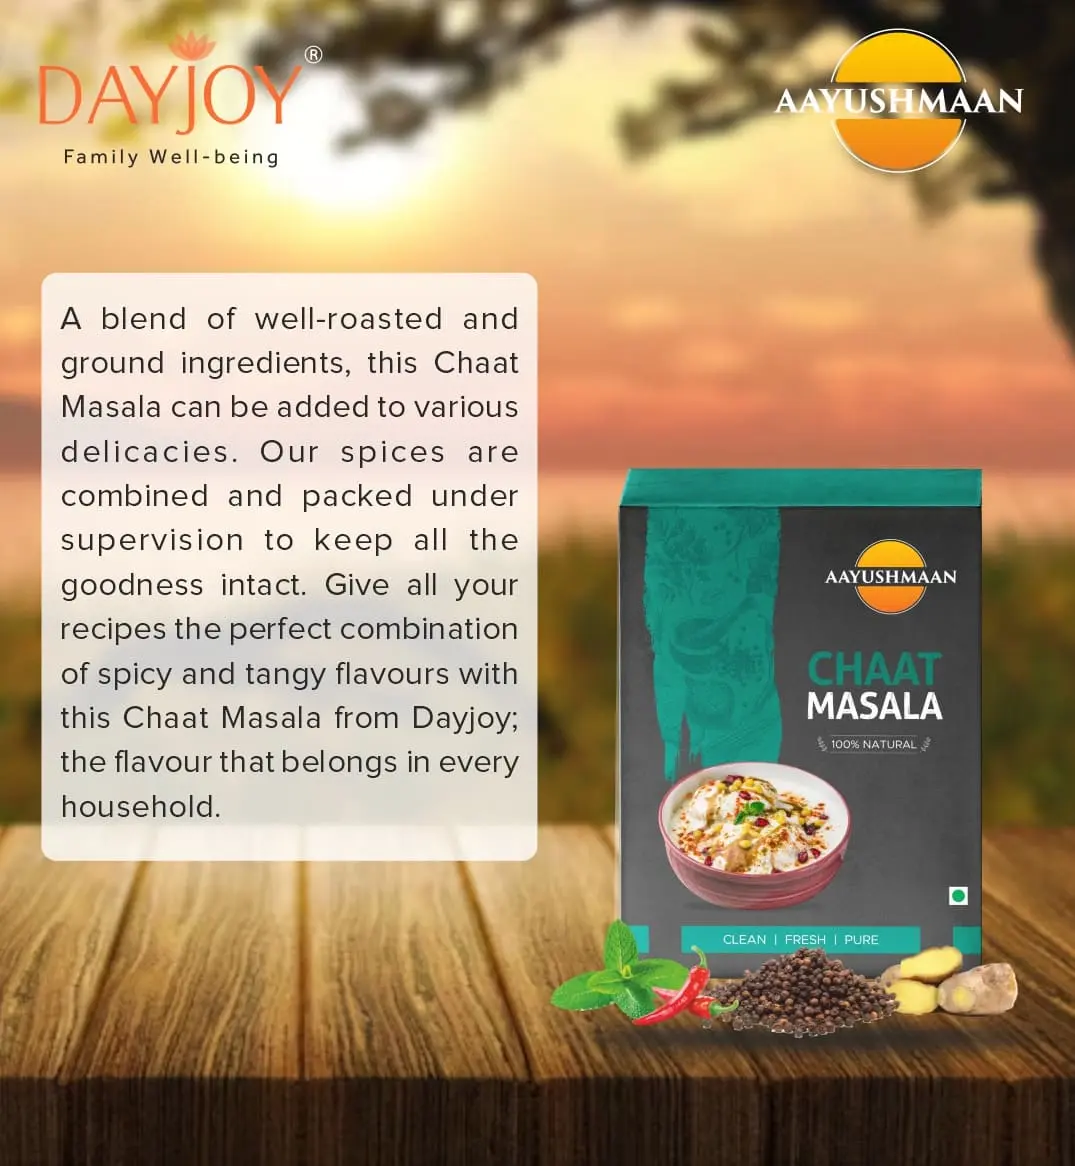 Aayushmaan Chaat Masala- a real touch of Indain spices